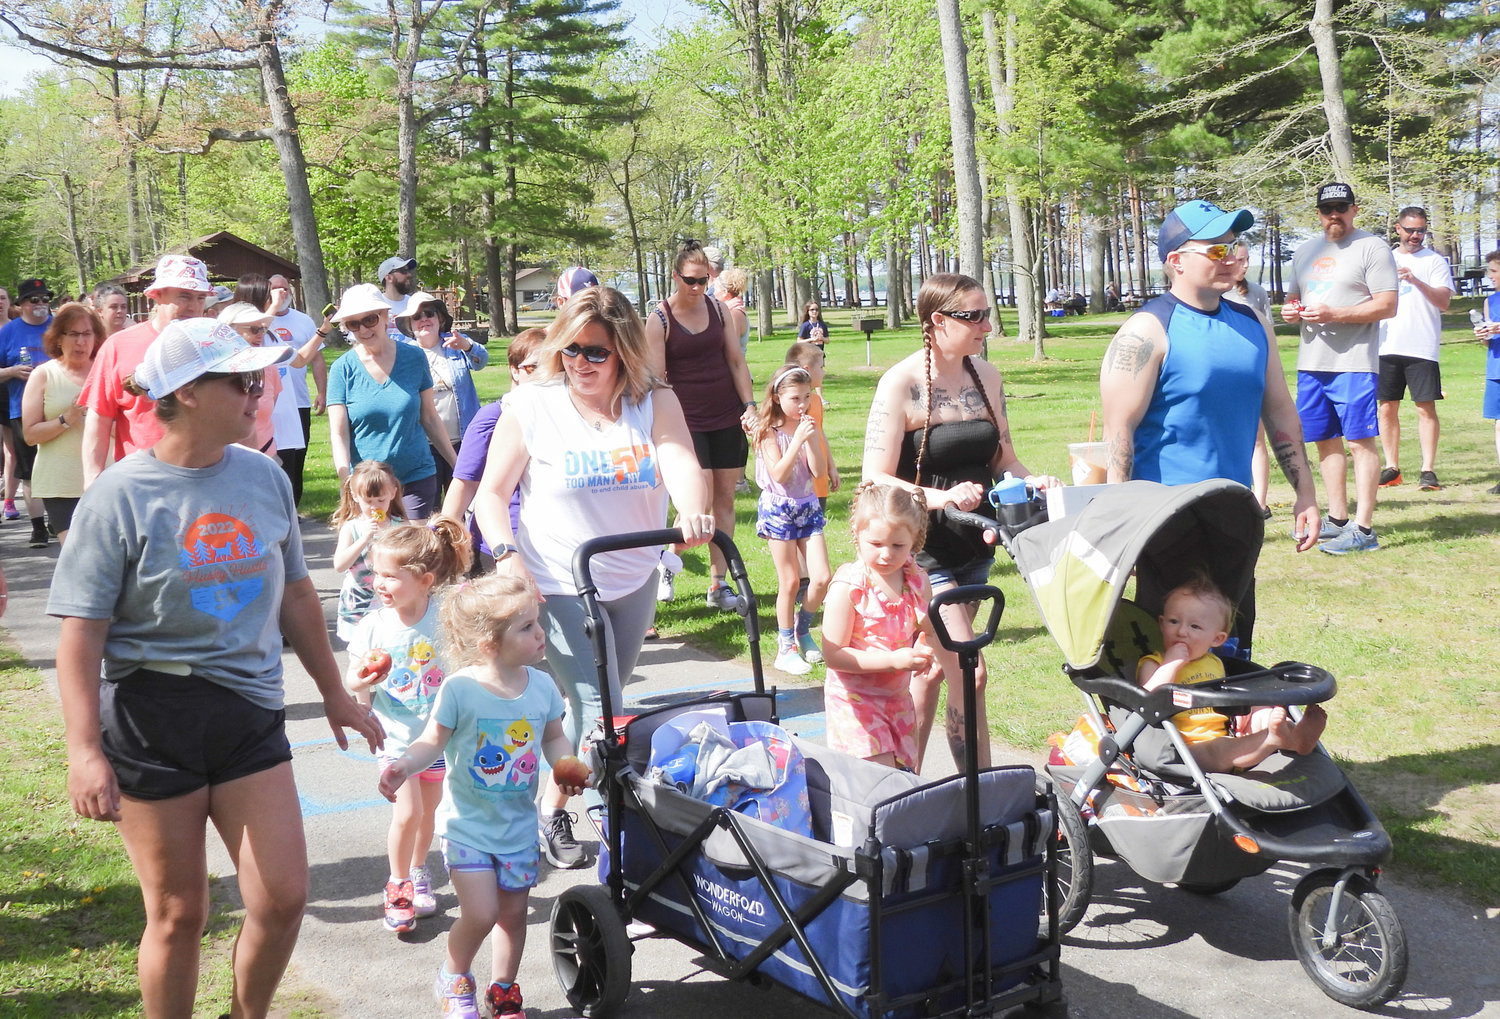 FAMILY FUN — Local residents enjoy a day of fun and sun at Verona Beach State Park for the Husky Hustle 5k Fun Run and Walk, raising money for the North Broad Elementary PTO to help students.